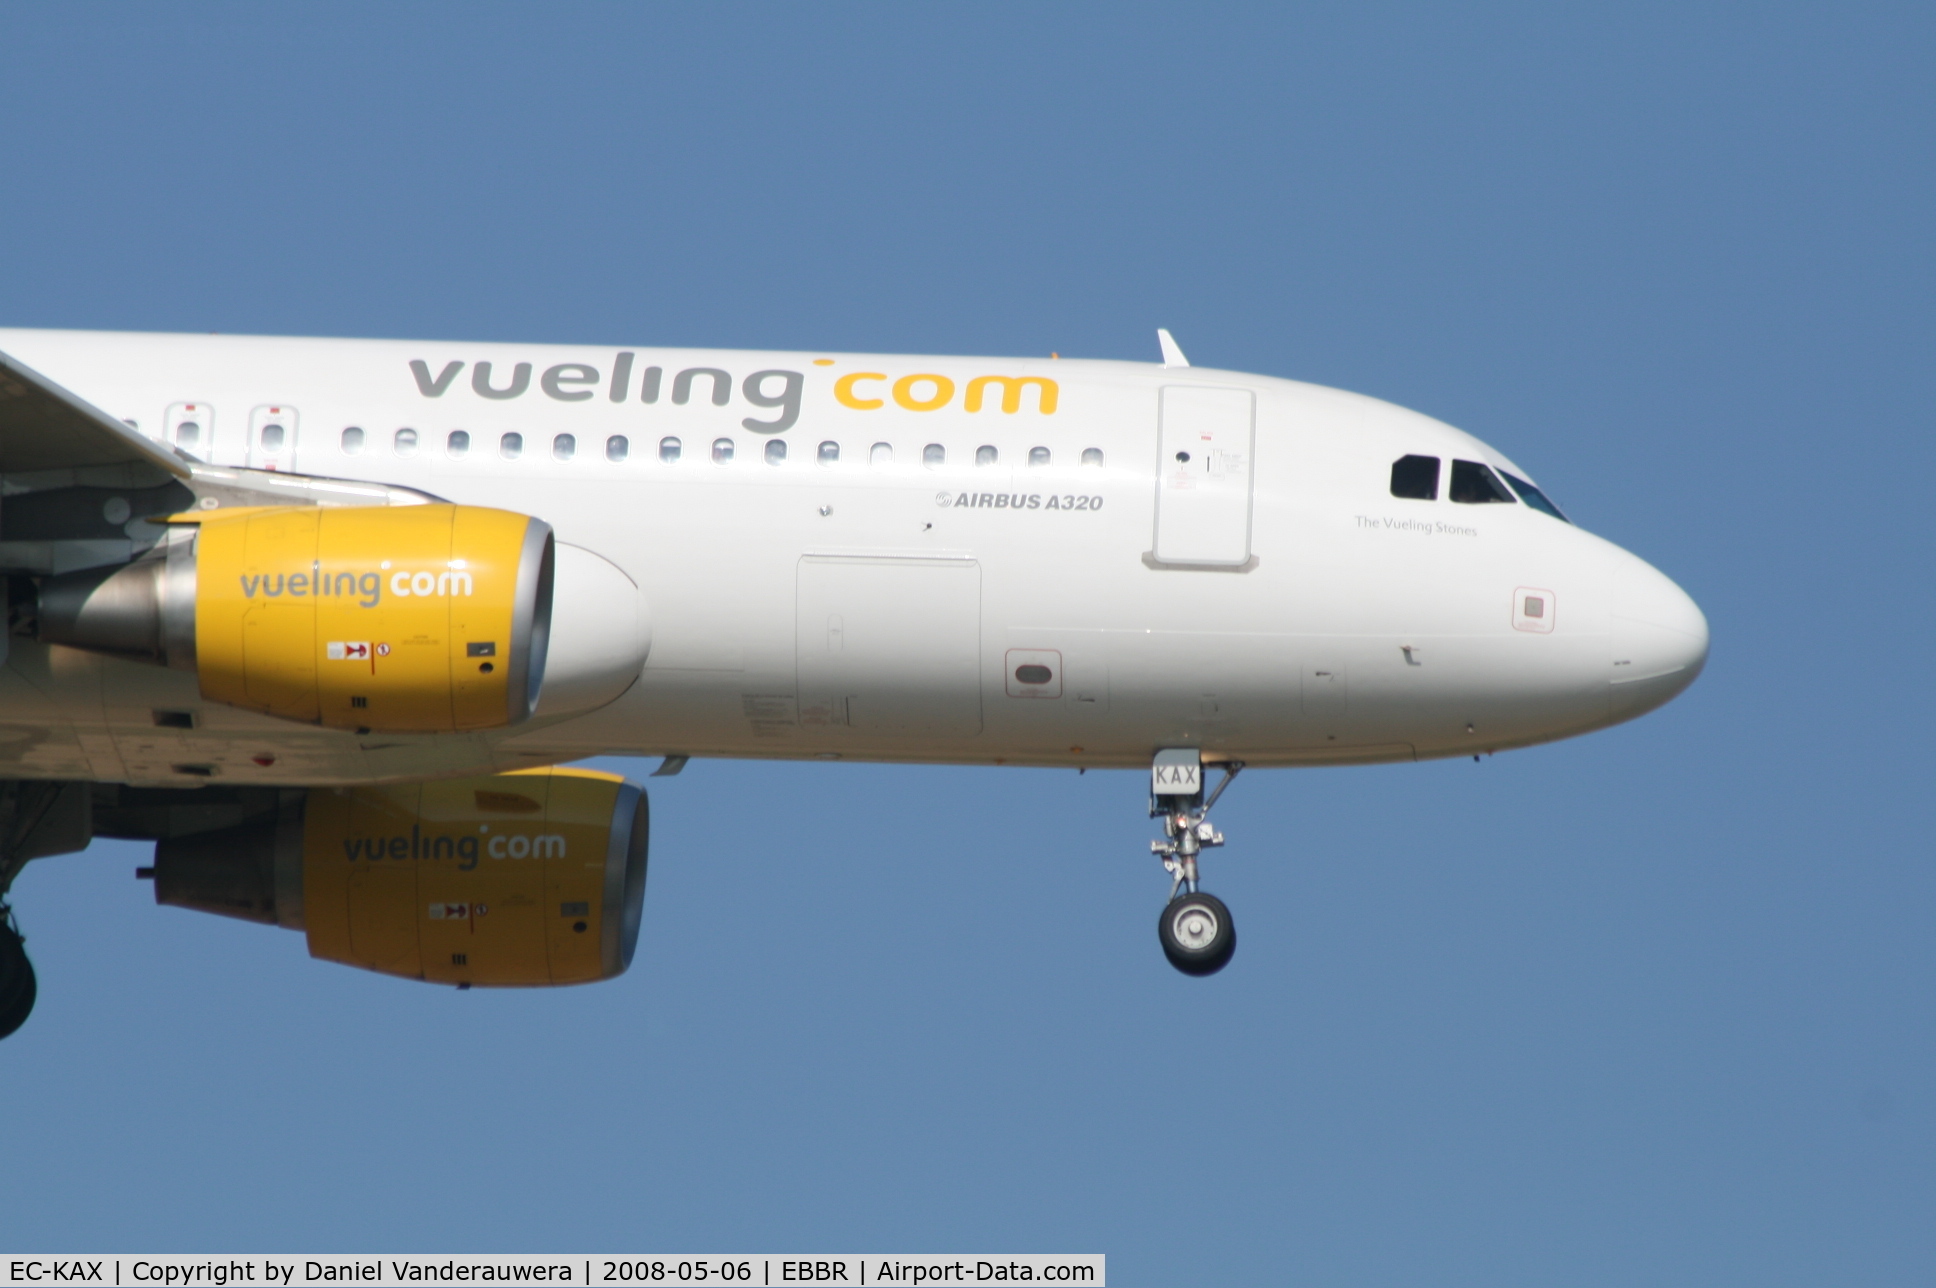 EC-KAX, 2007 Airbus A320-214 C/N 3040, arrival of flight VY5210 to rwy 02